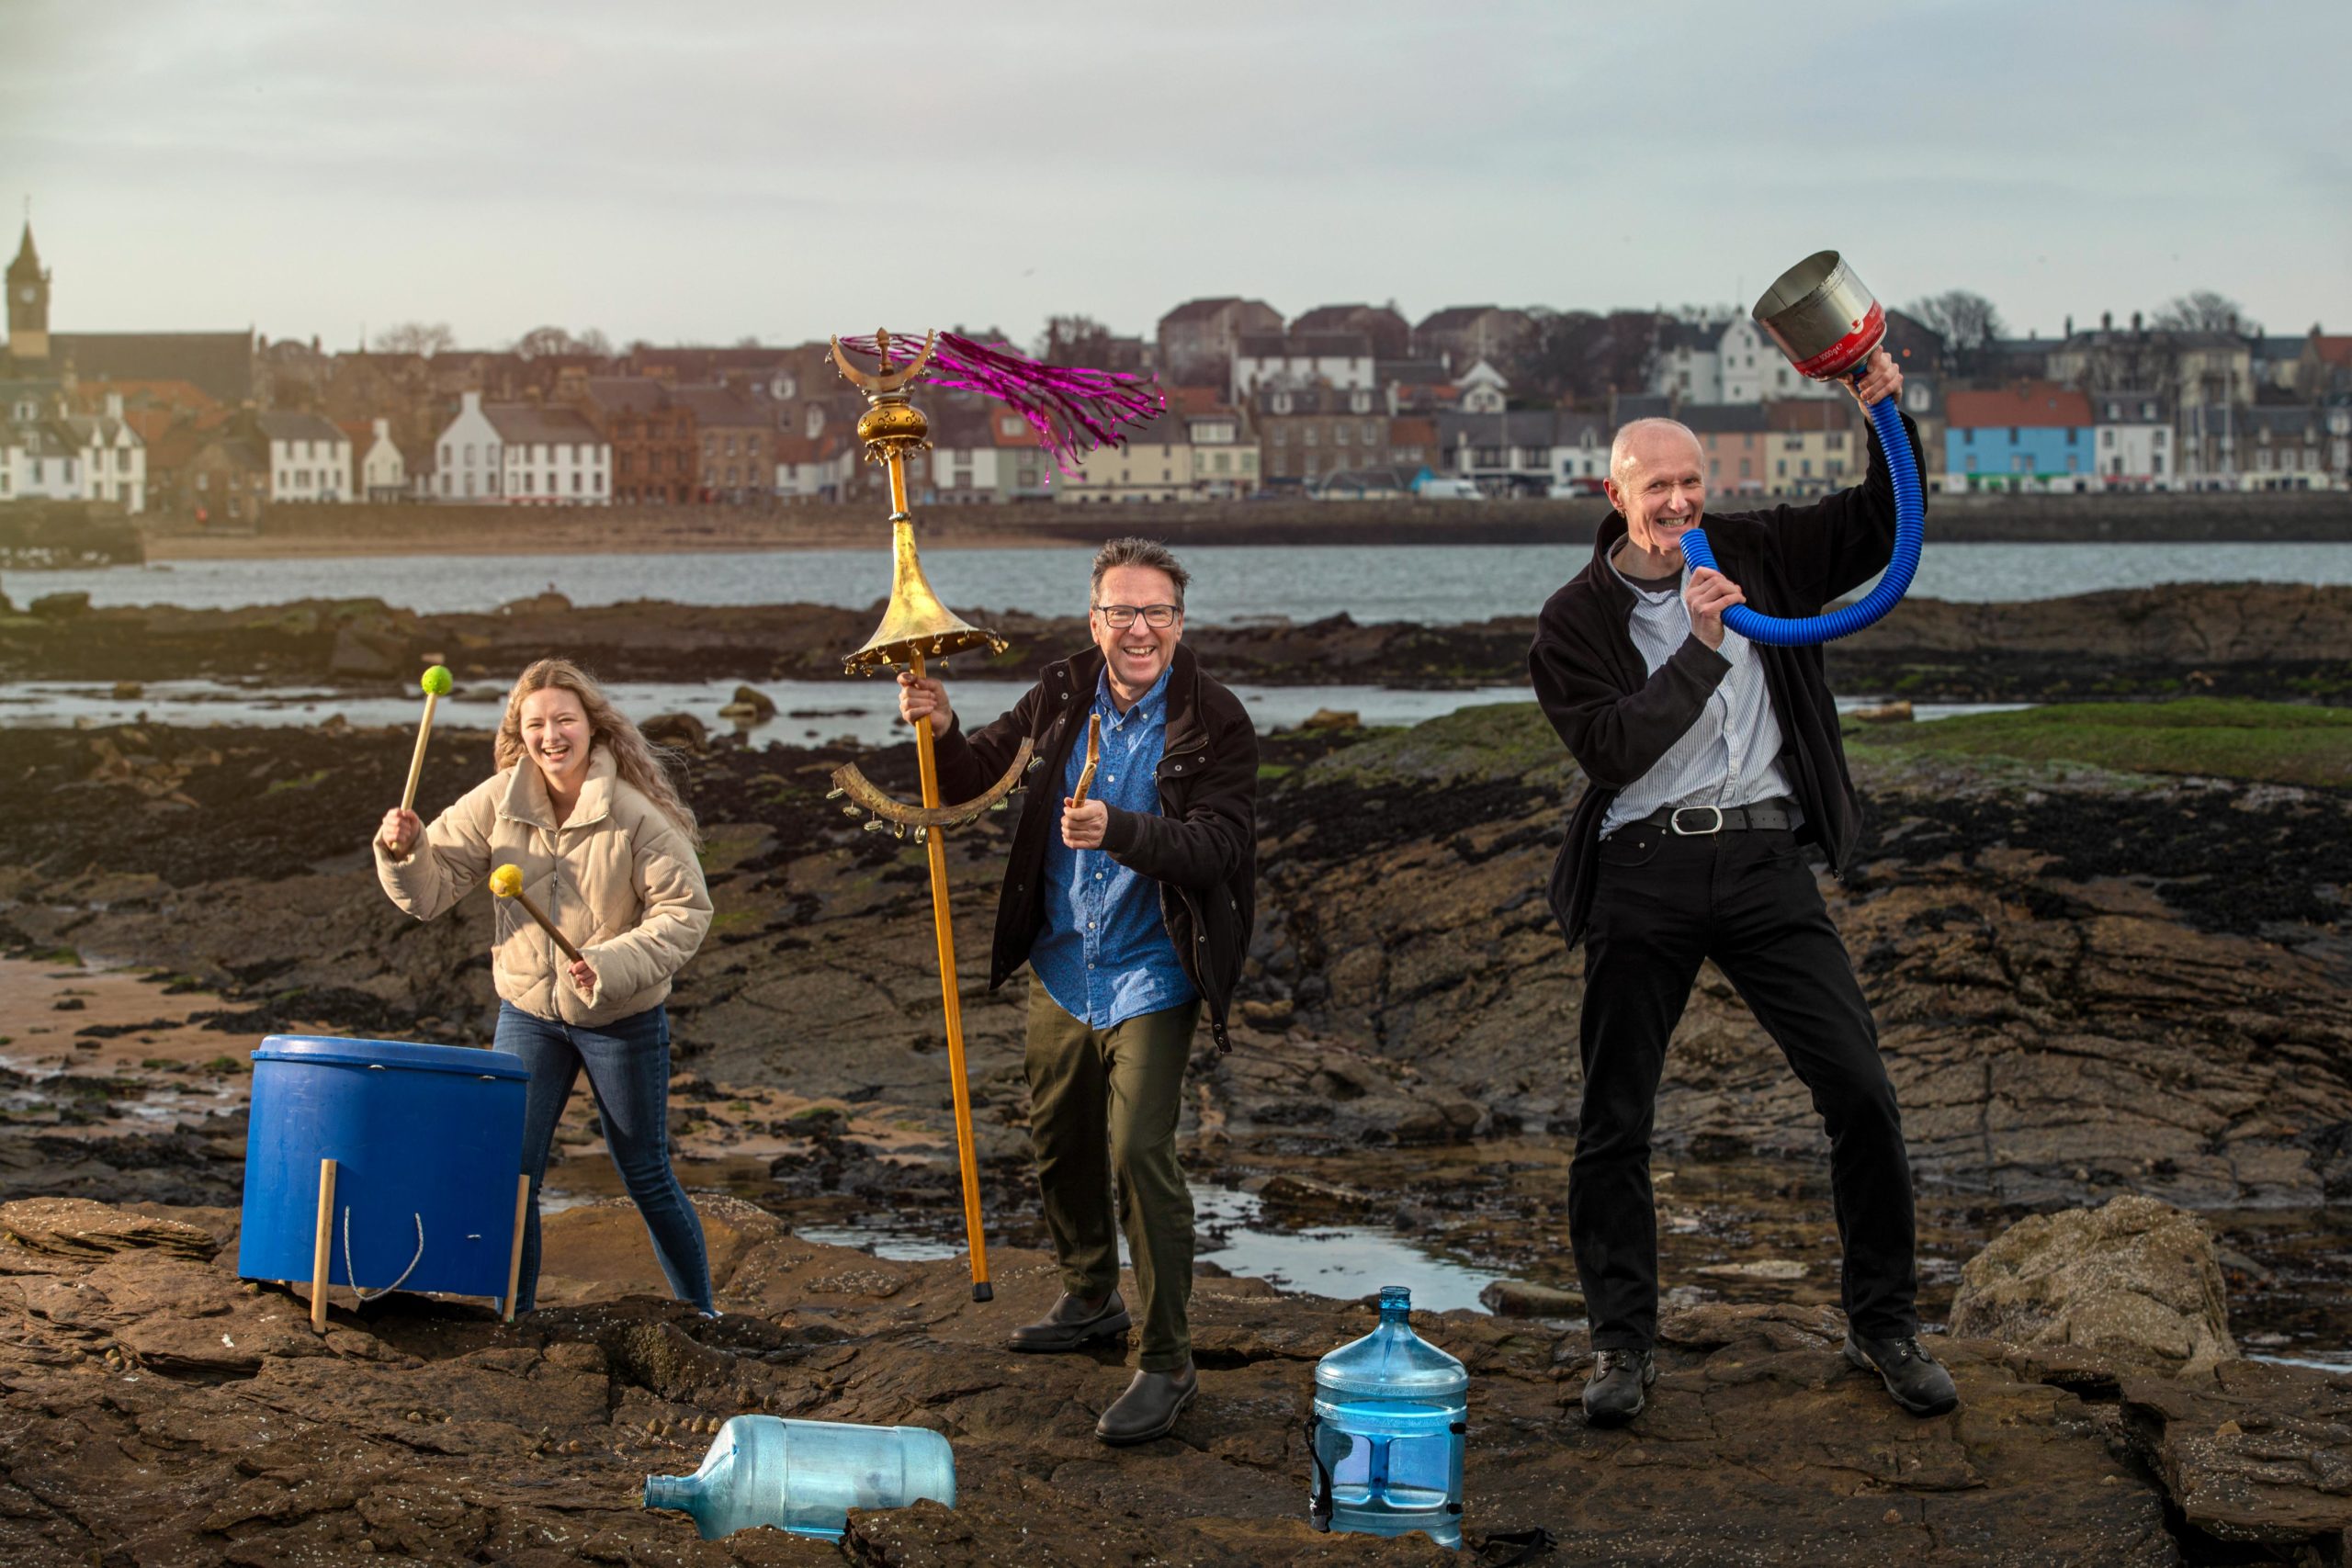 Richard Wemyss and Ellie Deas, of Cellardyke Sea Queen Festival, with composer and instrument maker Graeme Leak at Anstruther’s Billow Ness Beach as they prepare to turn plastic pollution into musical instruments for the 2020 East Neuk Festival.